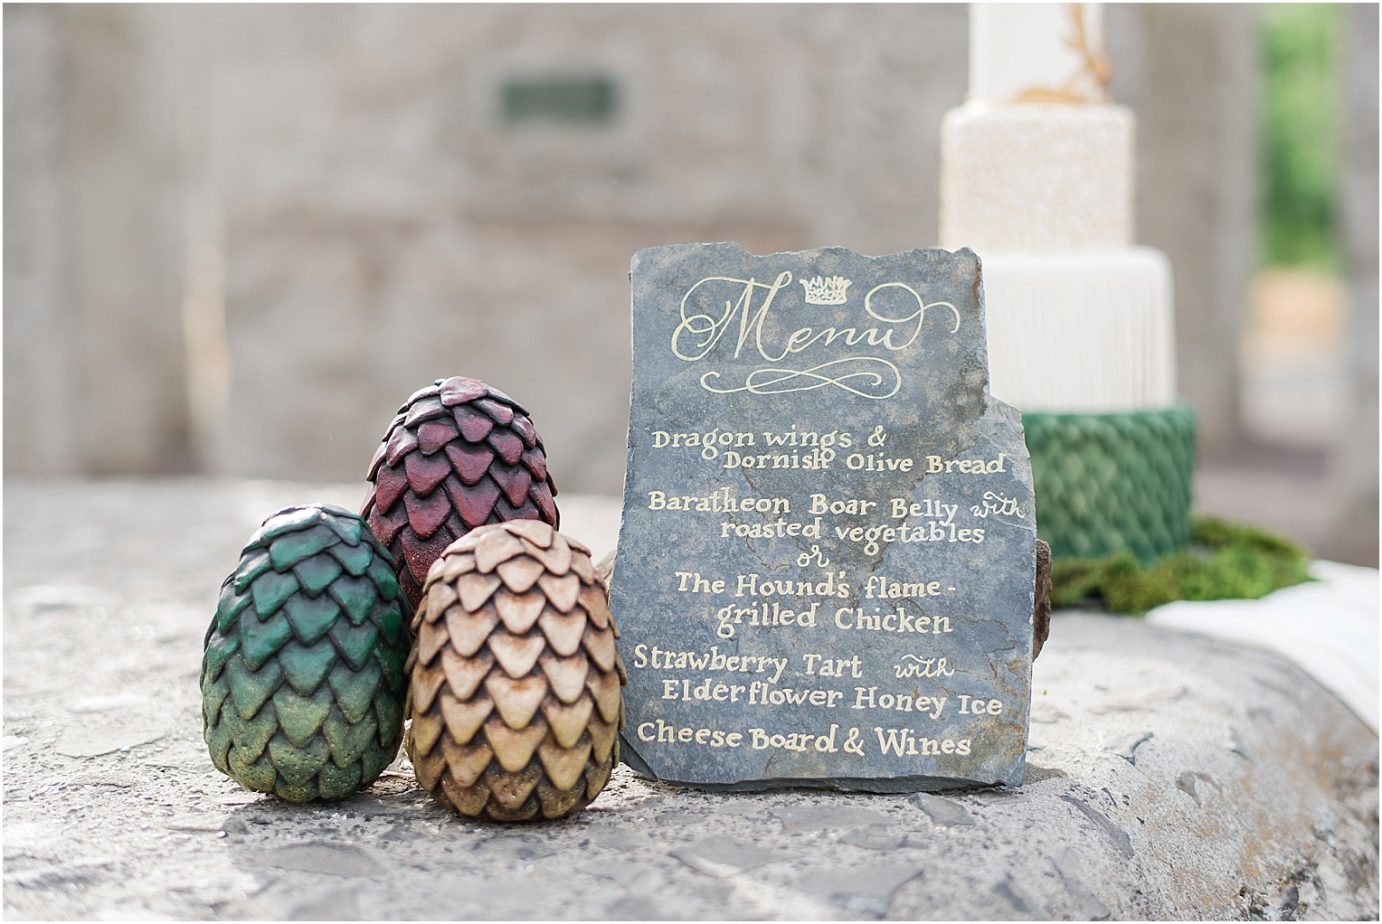 Game of Thrones wedding inspiration Goldendale WA Styled Shoot dragon eggs and menu